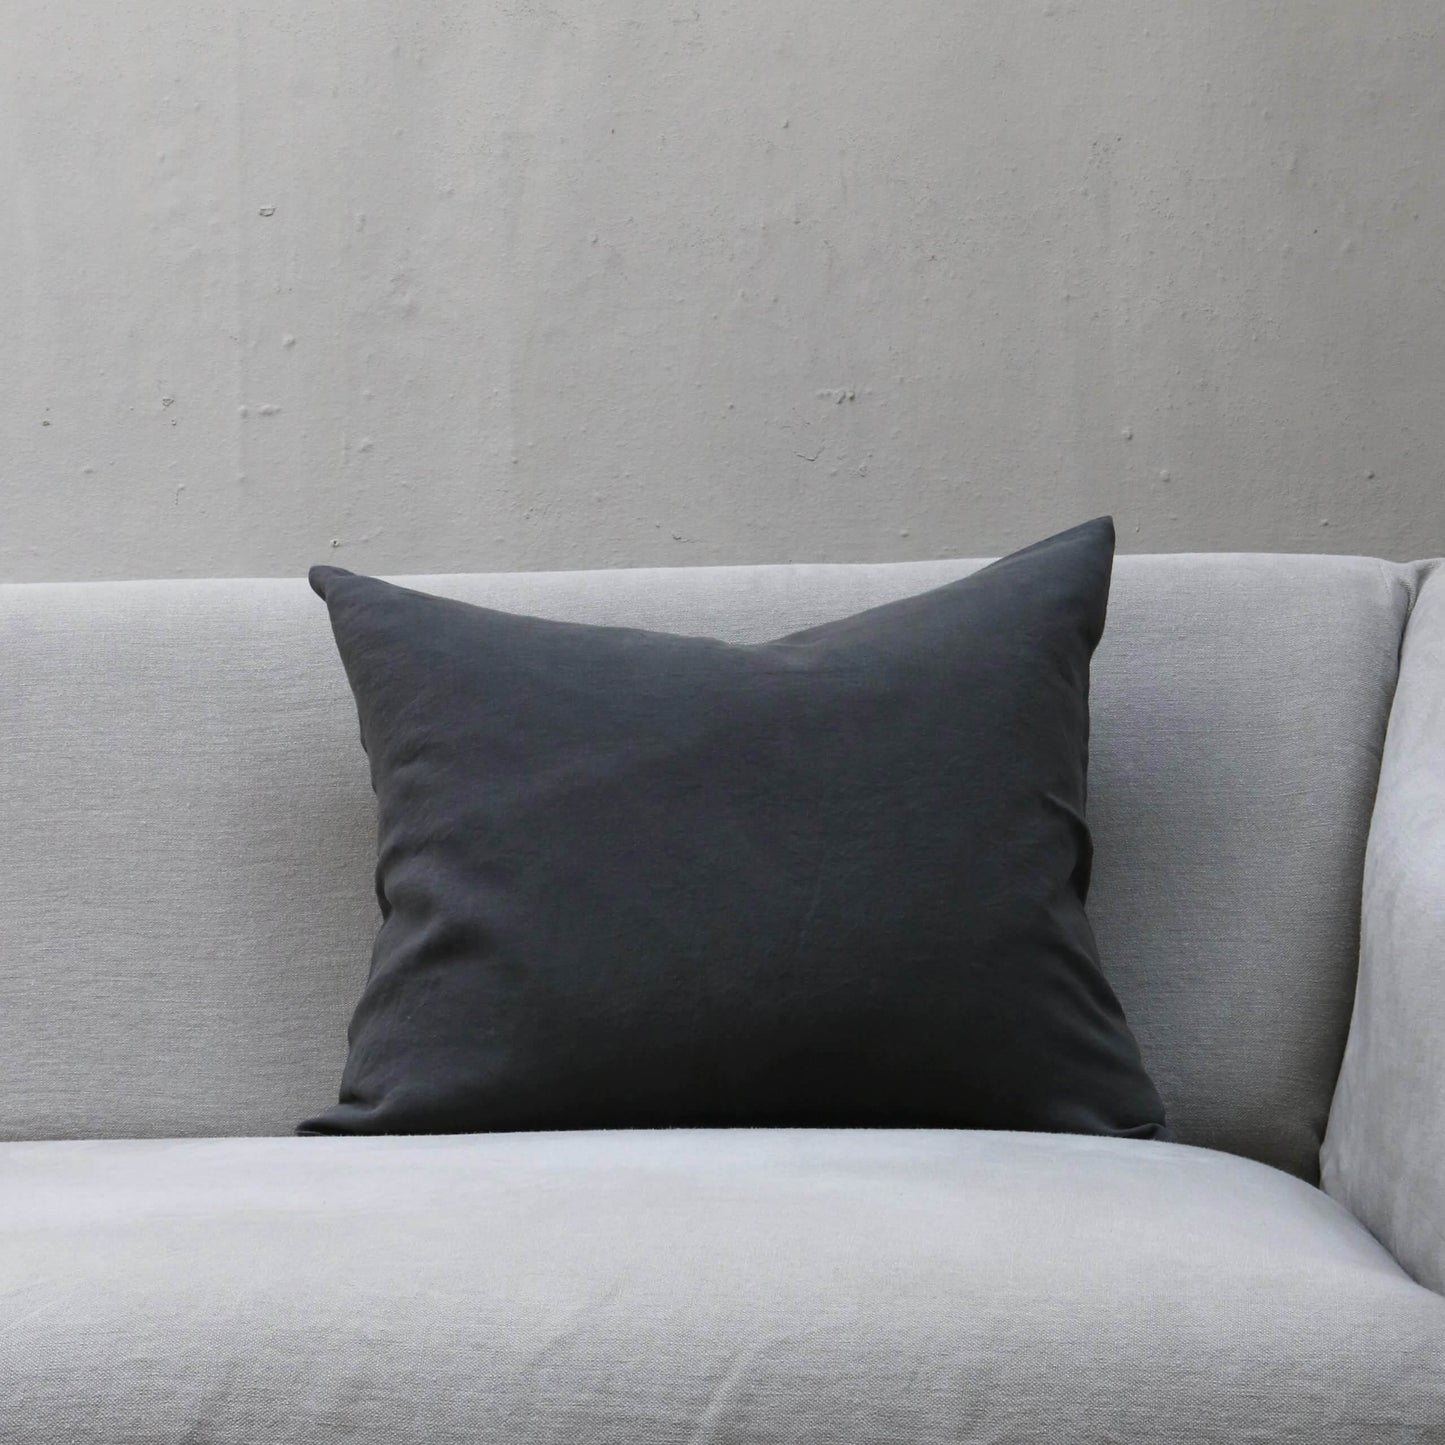 Society Limonta cushion in linen in the beautiful color Anthracite.